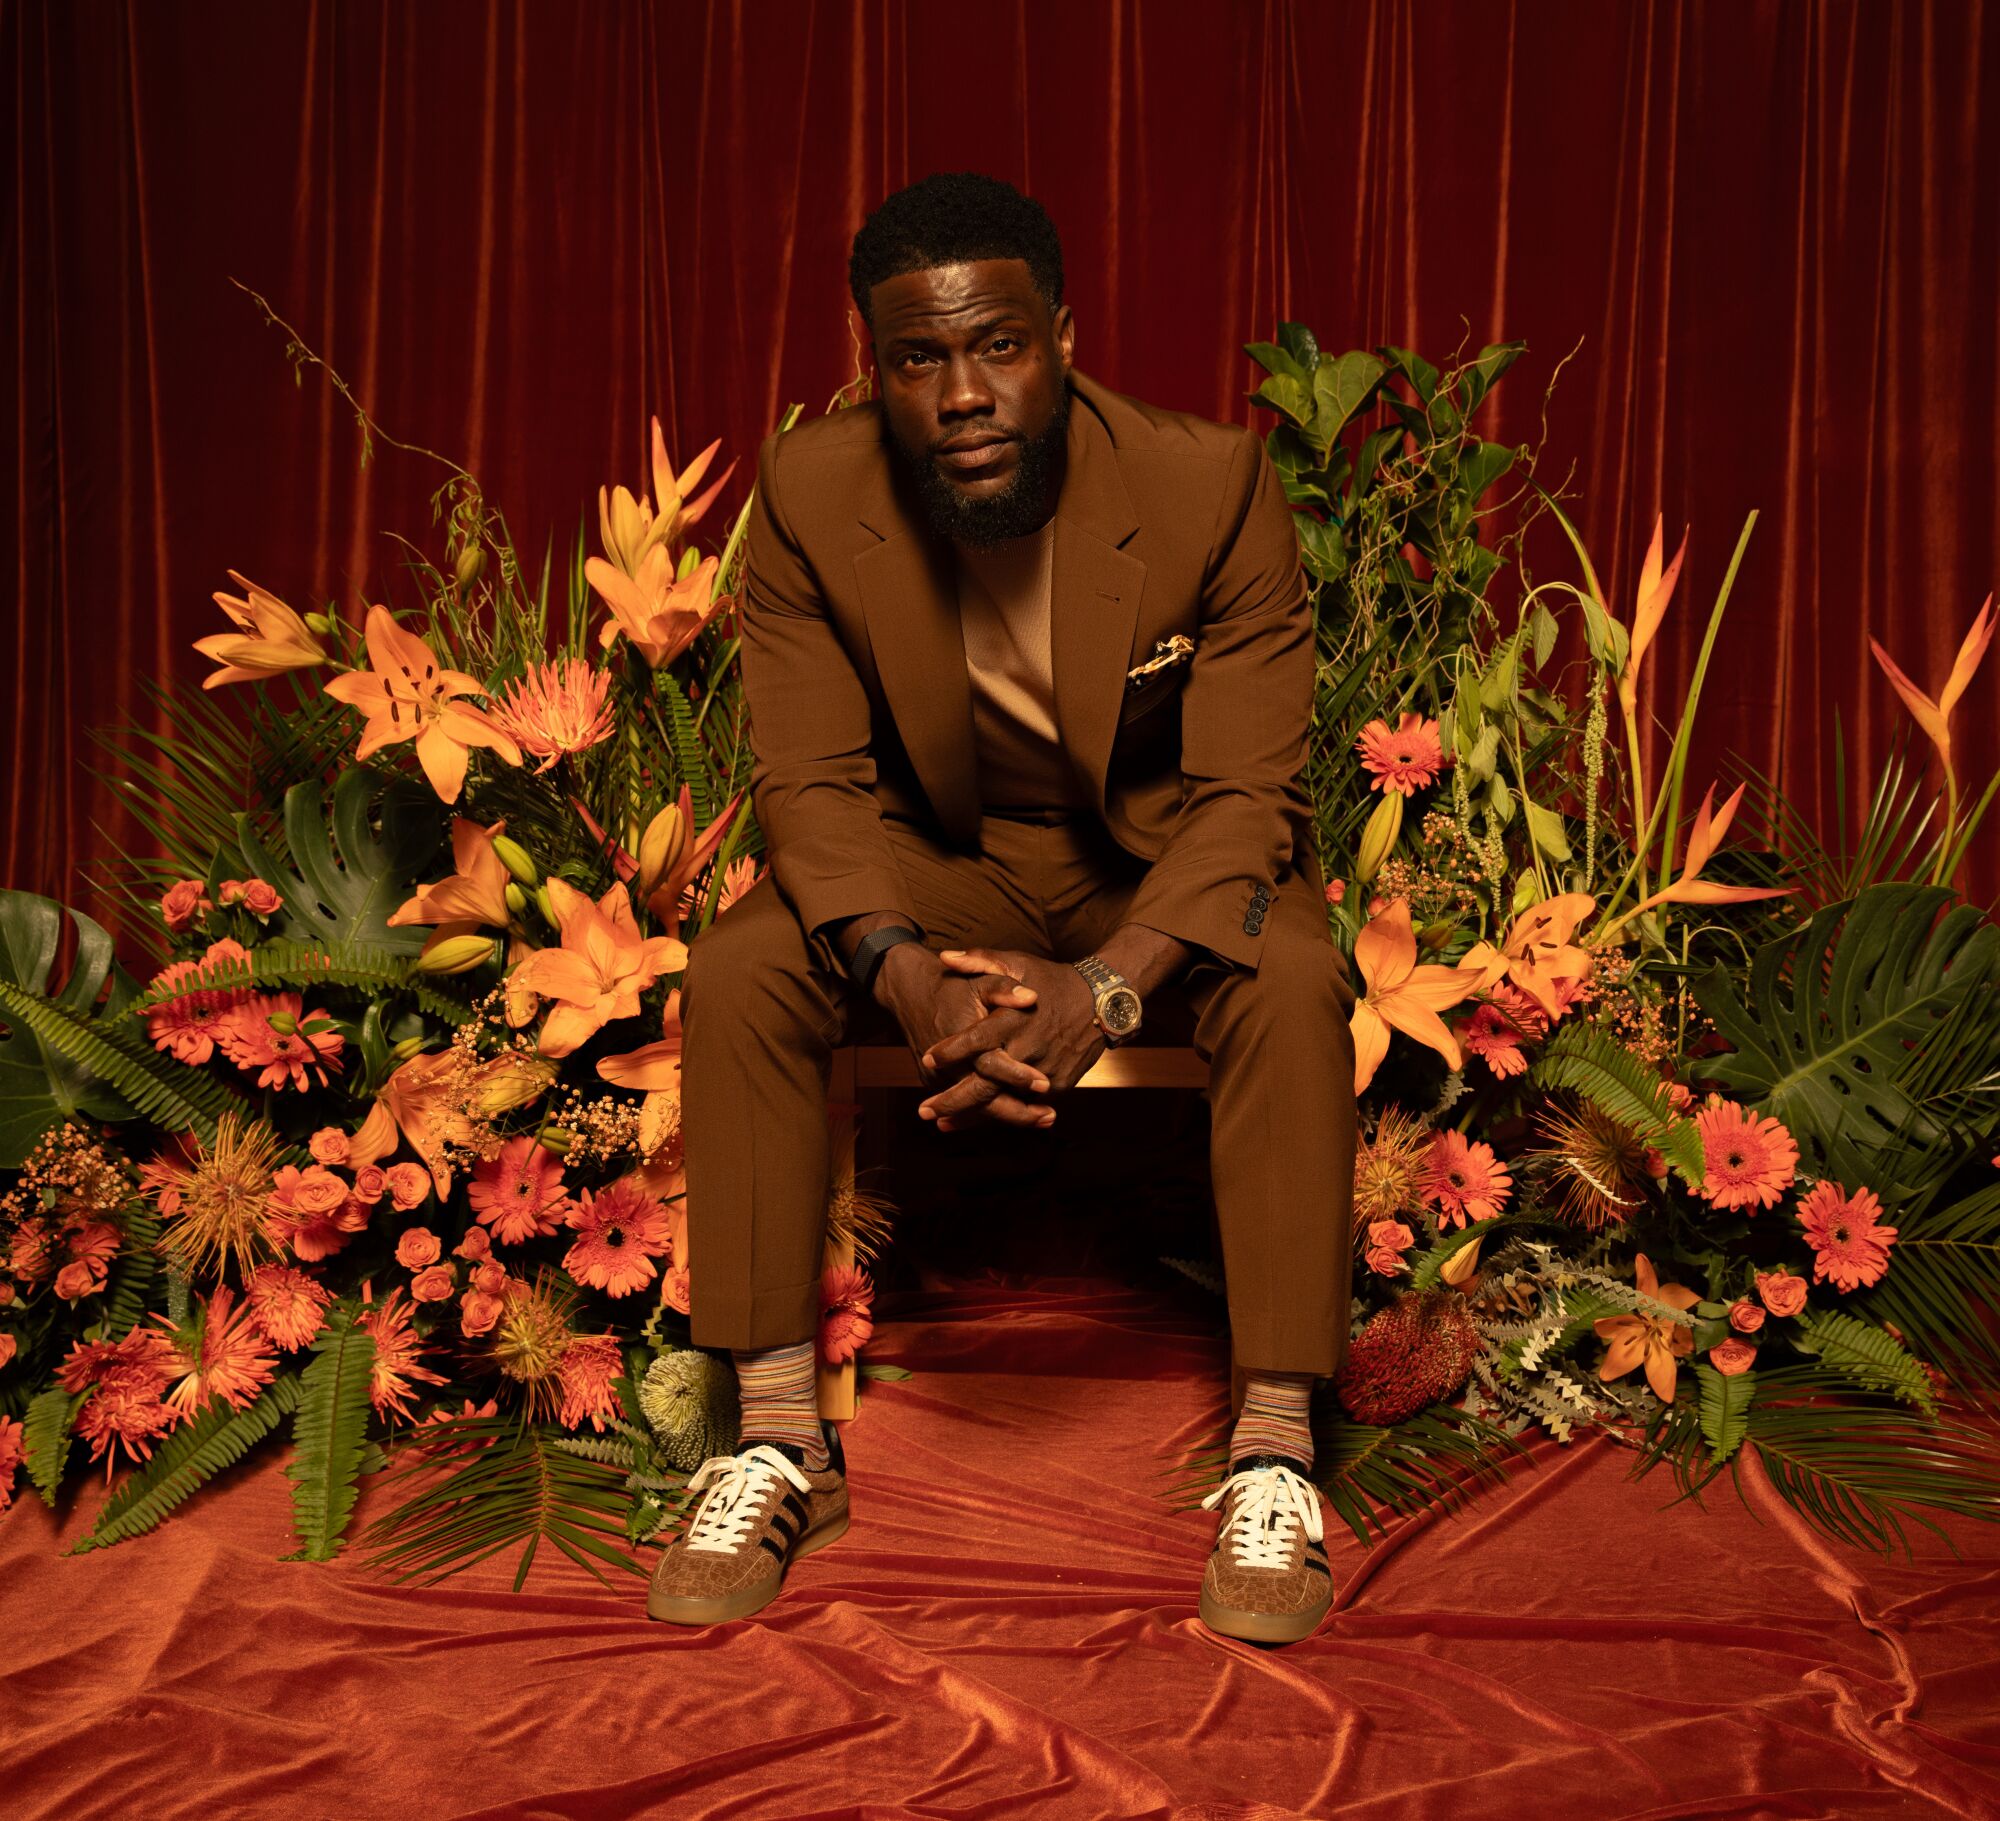 Kevin Hart in a brown suit and shoes sitting among orange flowers and green leaves and a copper carpet